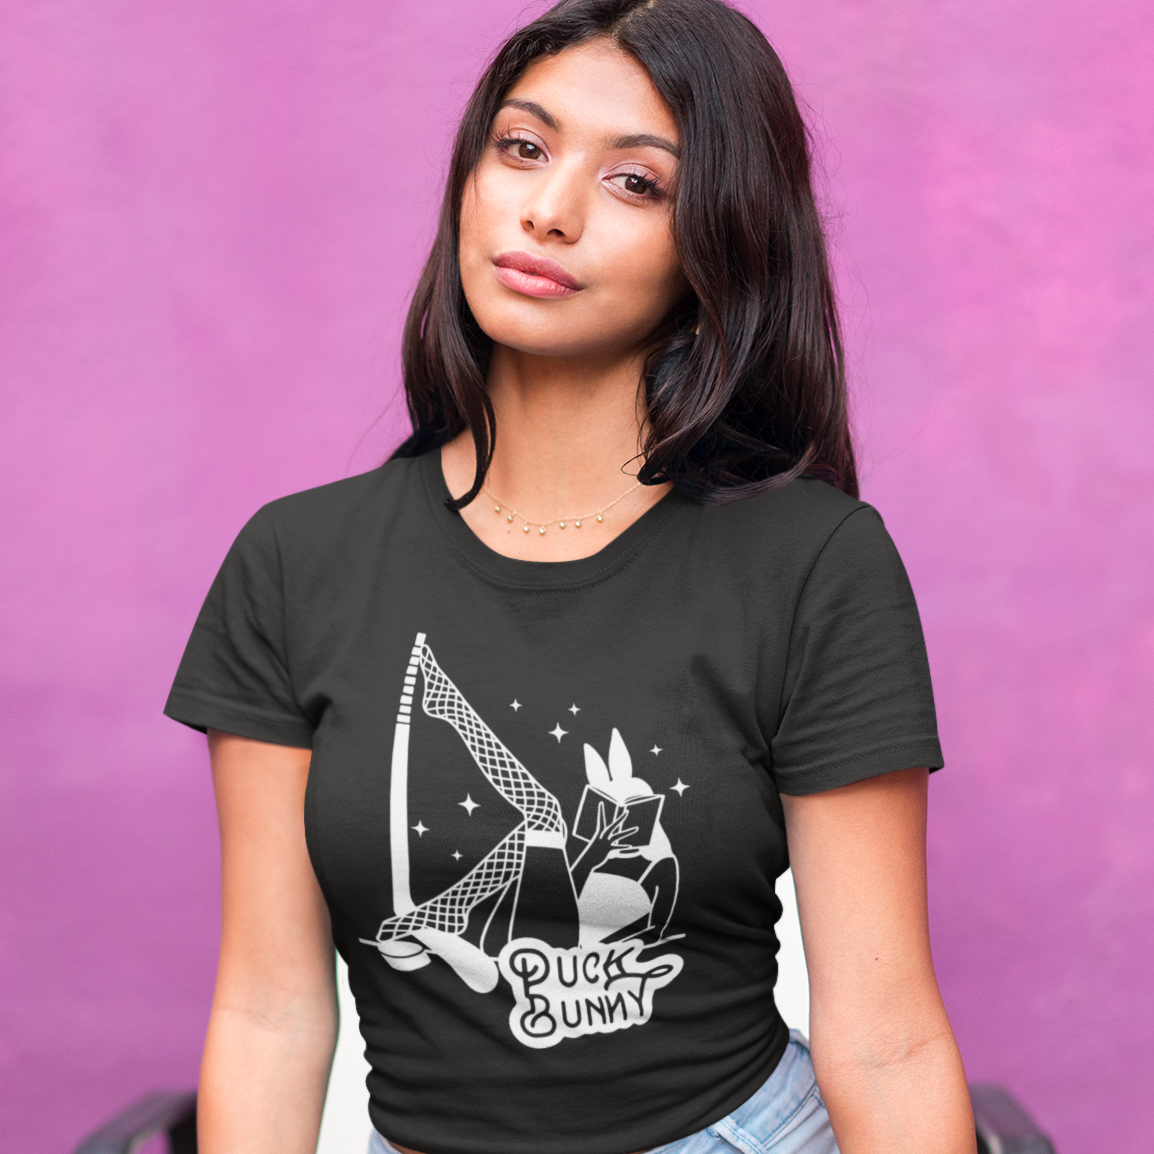 Puck Bunny Hockey romance bookish tee for a smutty reader